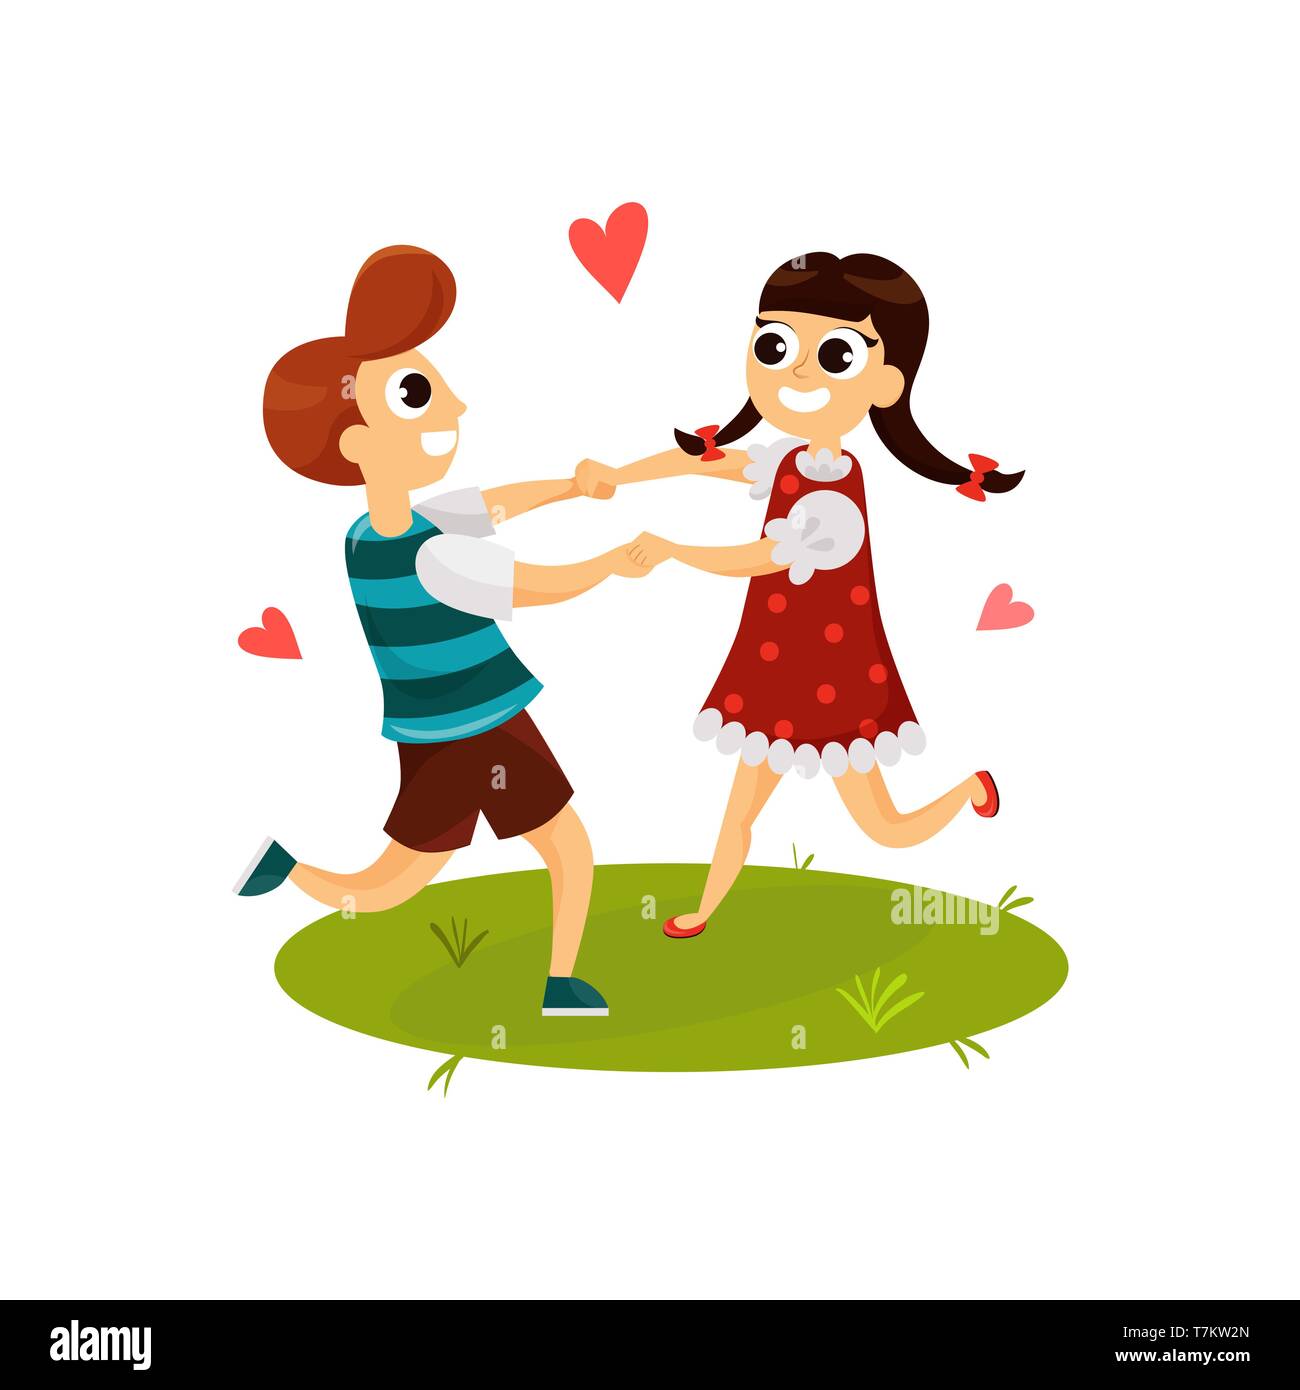 Boy and a girl playing on the grass. Kids playing together flat style vector illustration isolated on white background Stock Vector